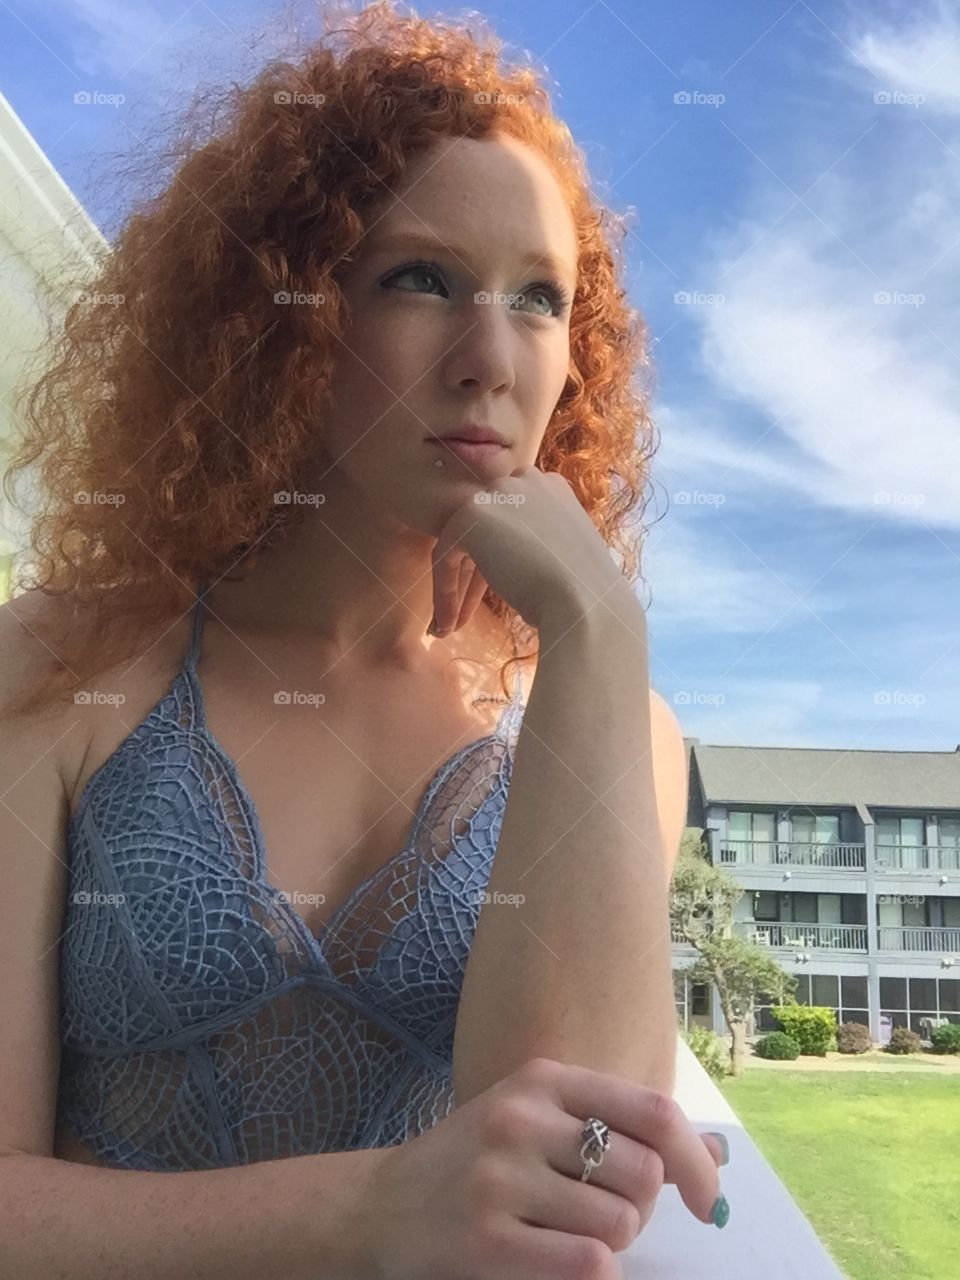 Redhead with thoughts in the sky 